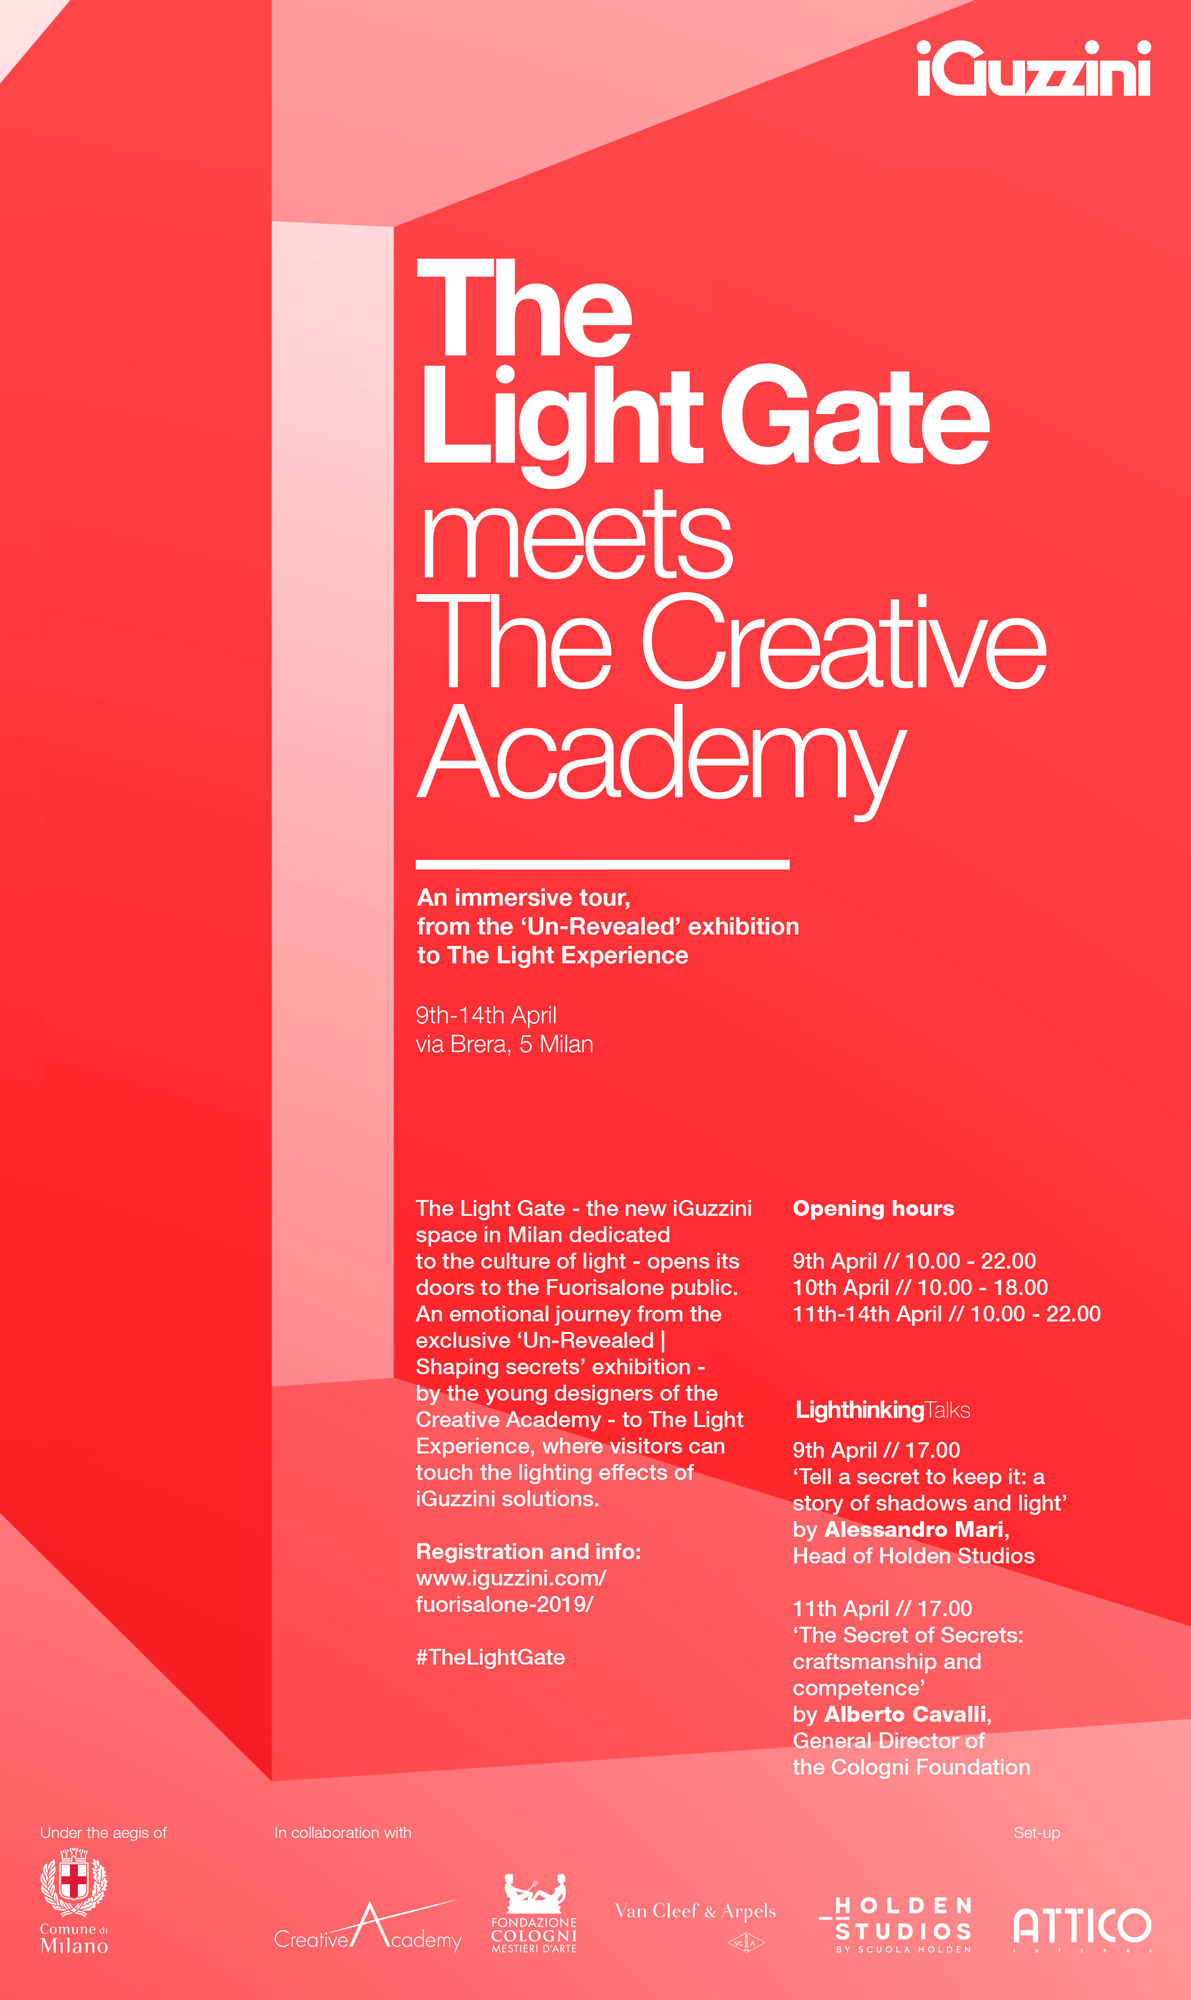 The Light Gate meets the Creative Academy